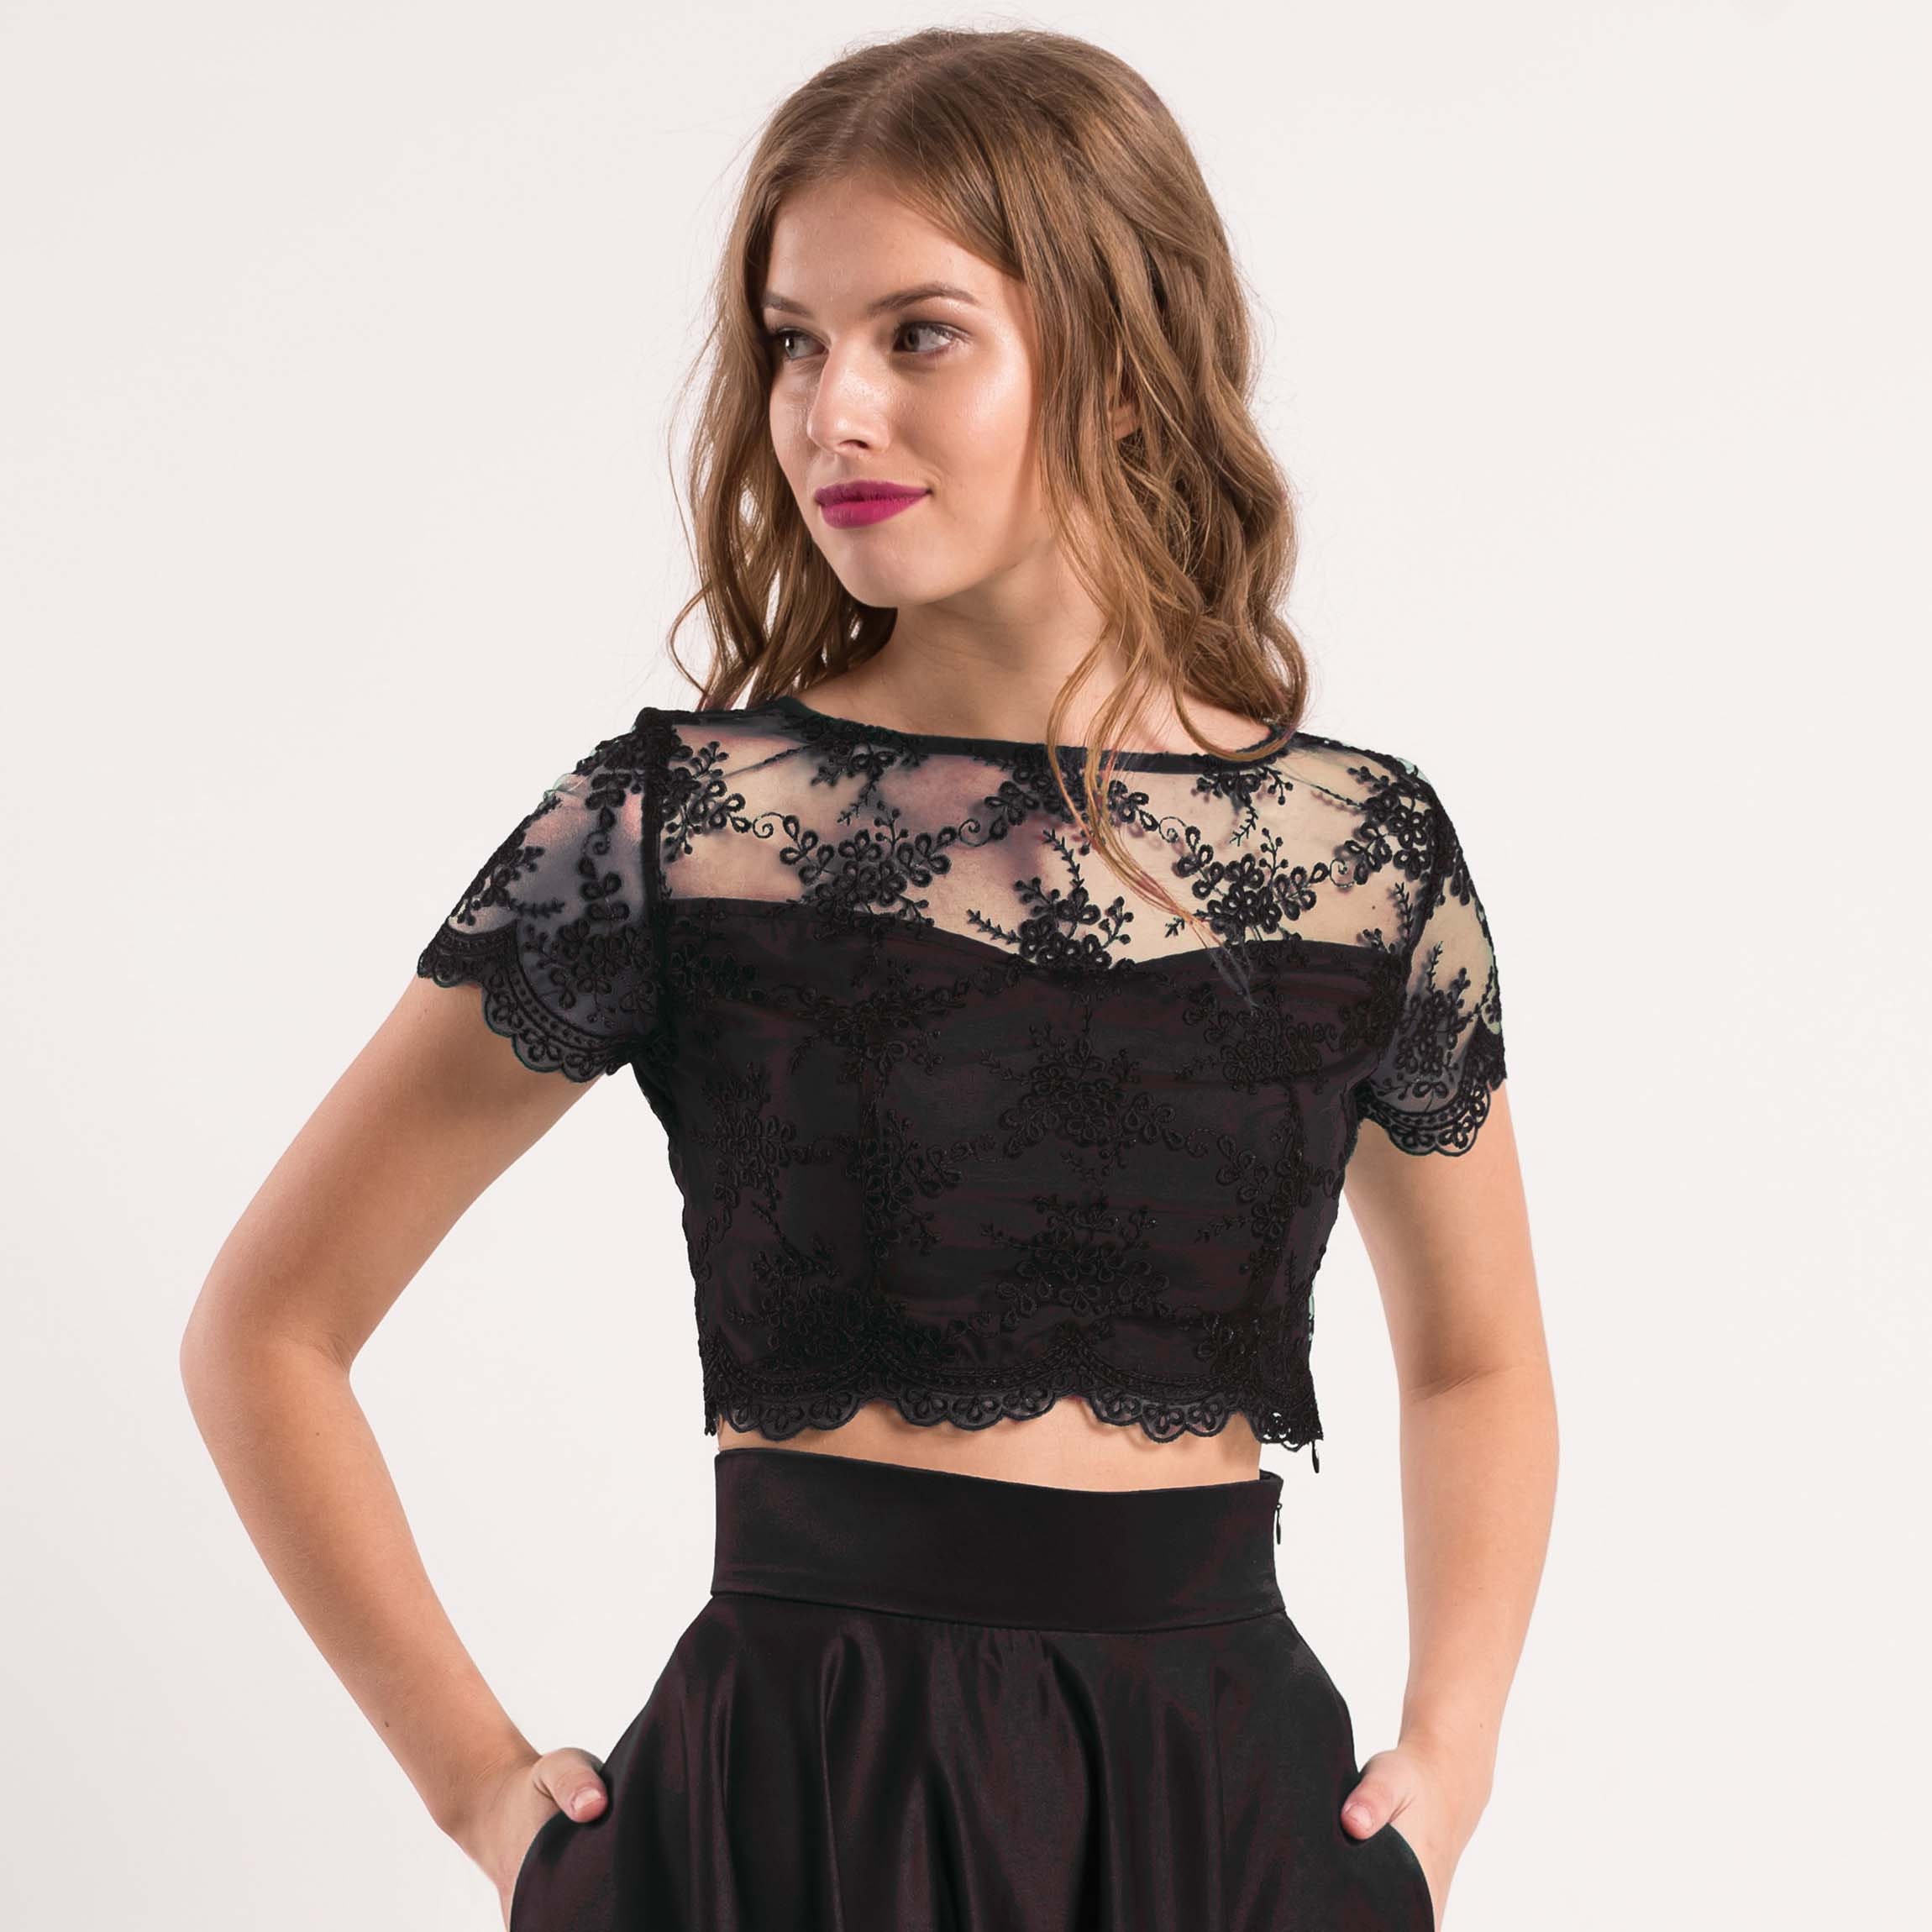 Evening Black Crop Top / Lace Top With Buttons / Crop Top Prom Dress /  Floral Lace Top With Short Sleeves / Evening Gown -  Norway